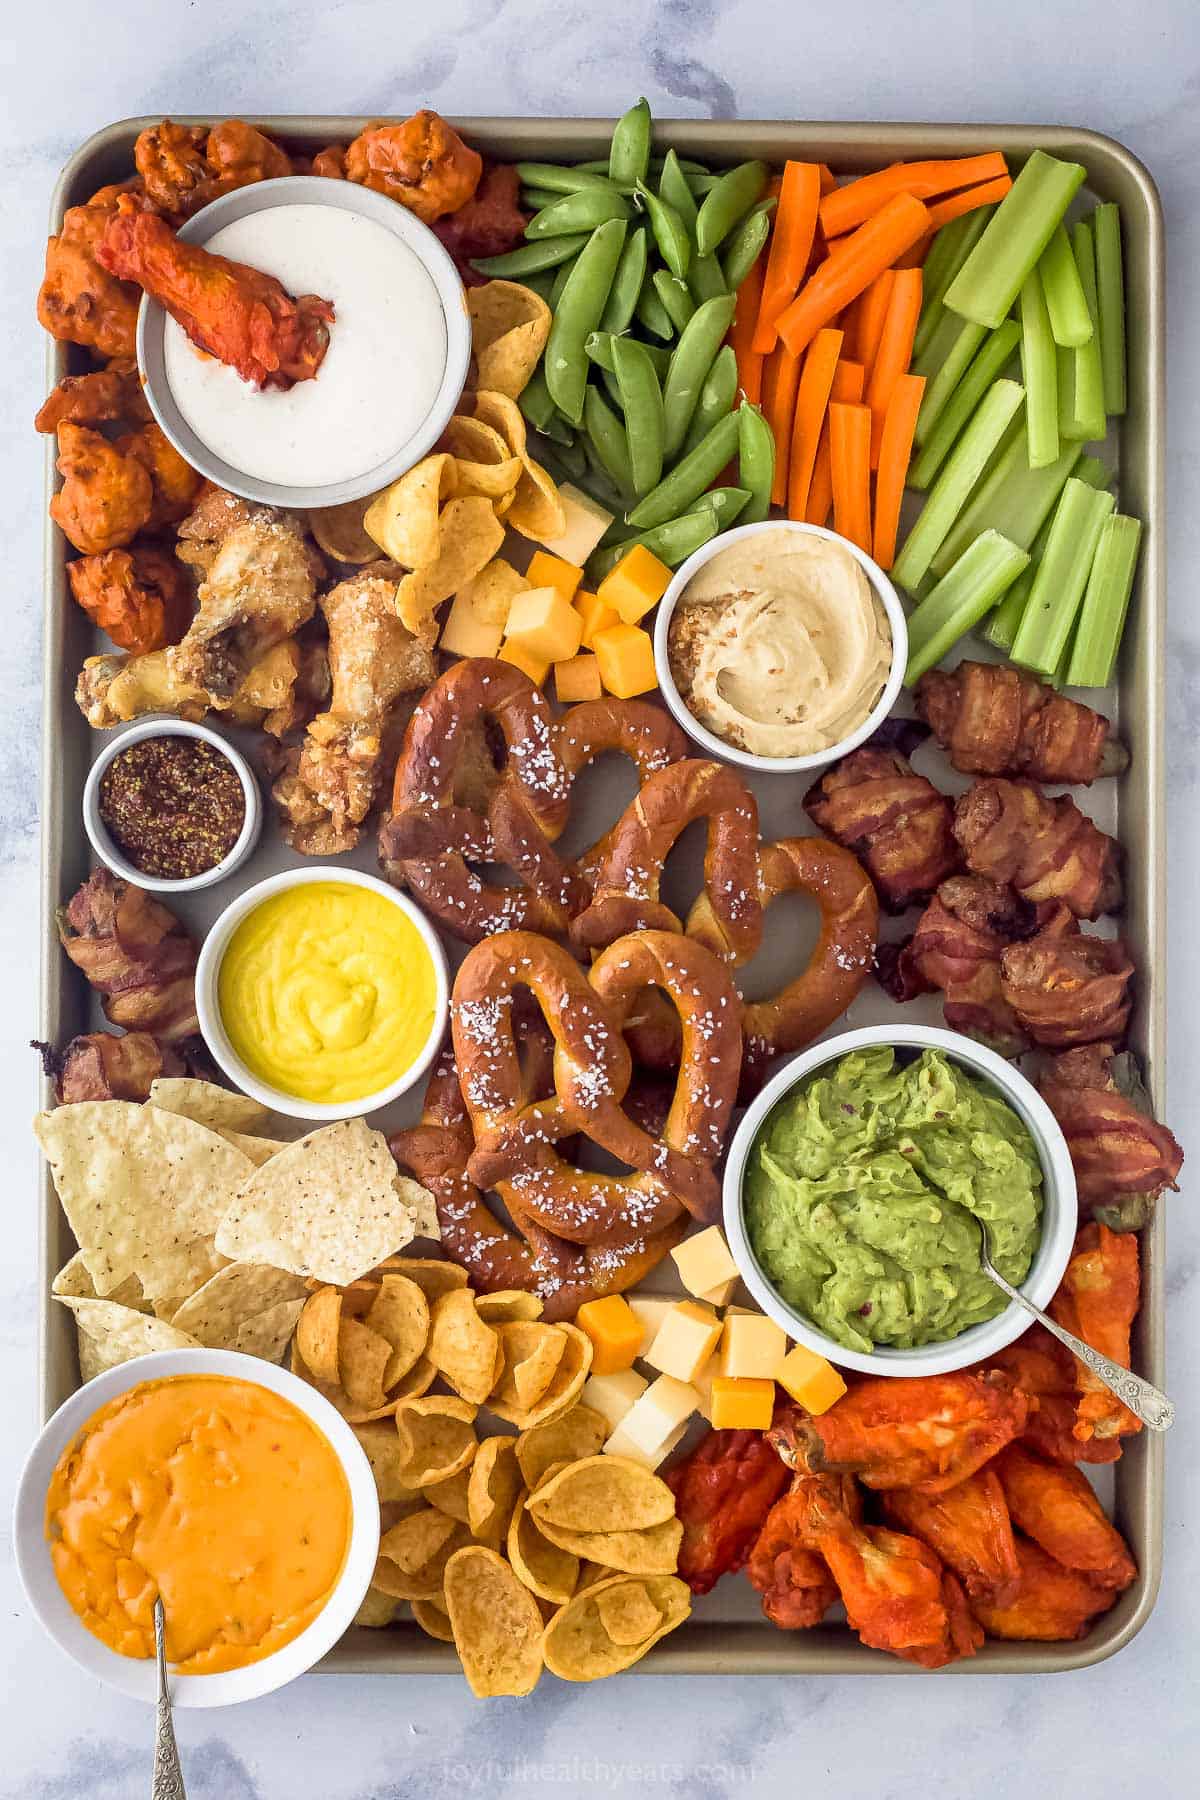 an assortment of snack foods on a tray like pretzels, chicken wings, cheese, veggie sticks, and tortilla chips scattered around dips like guacamole, mustard, and ranch